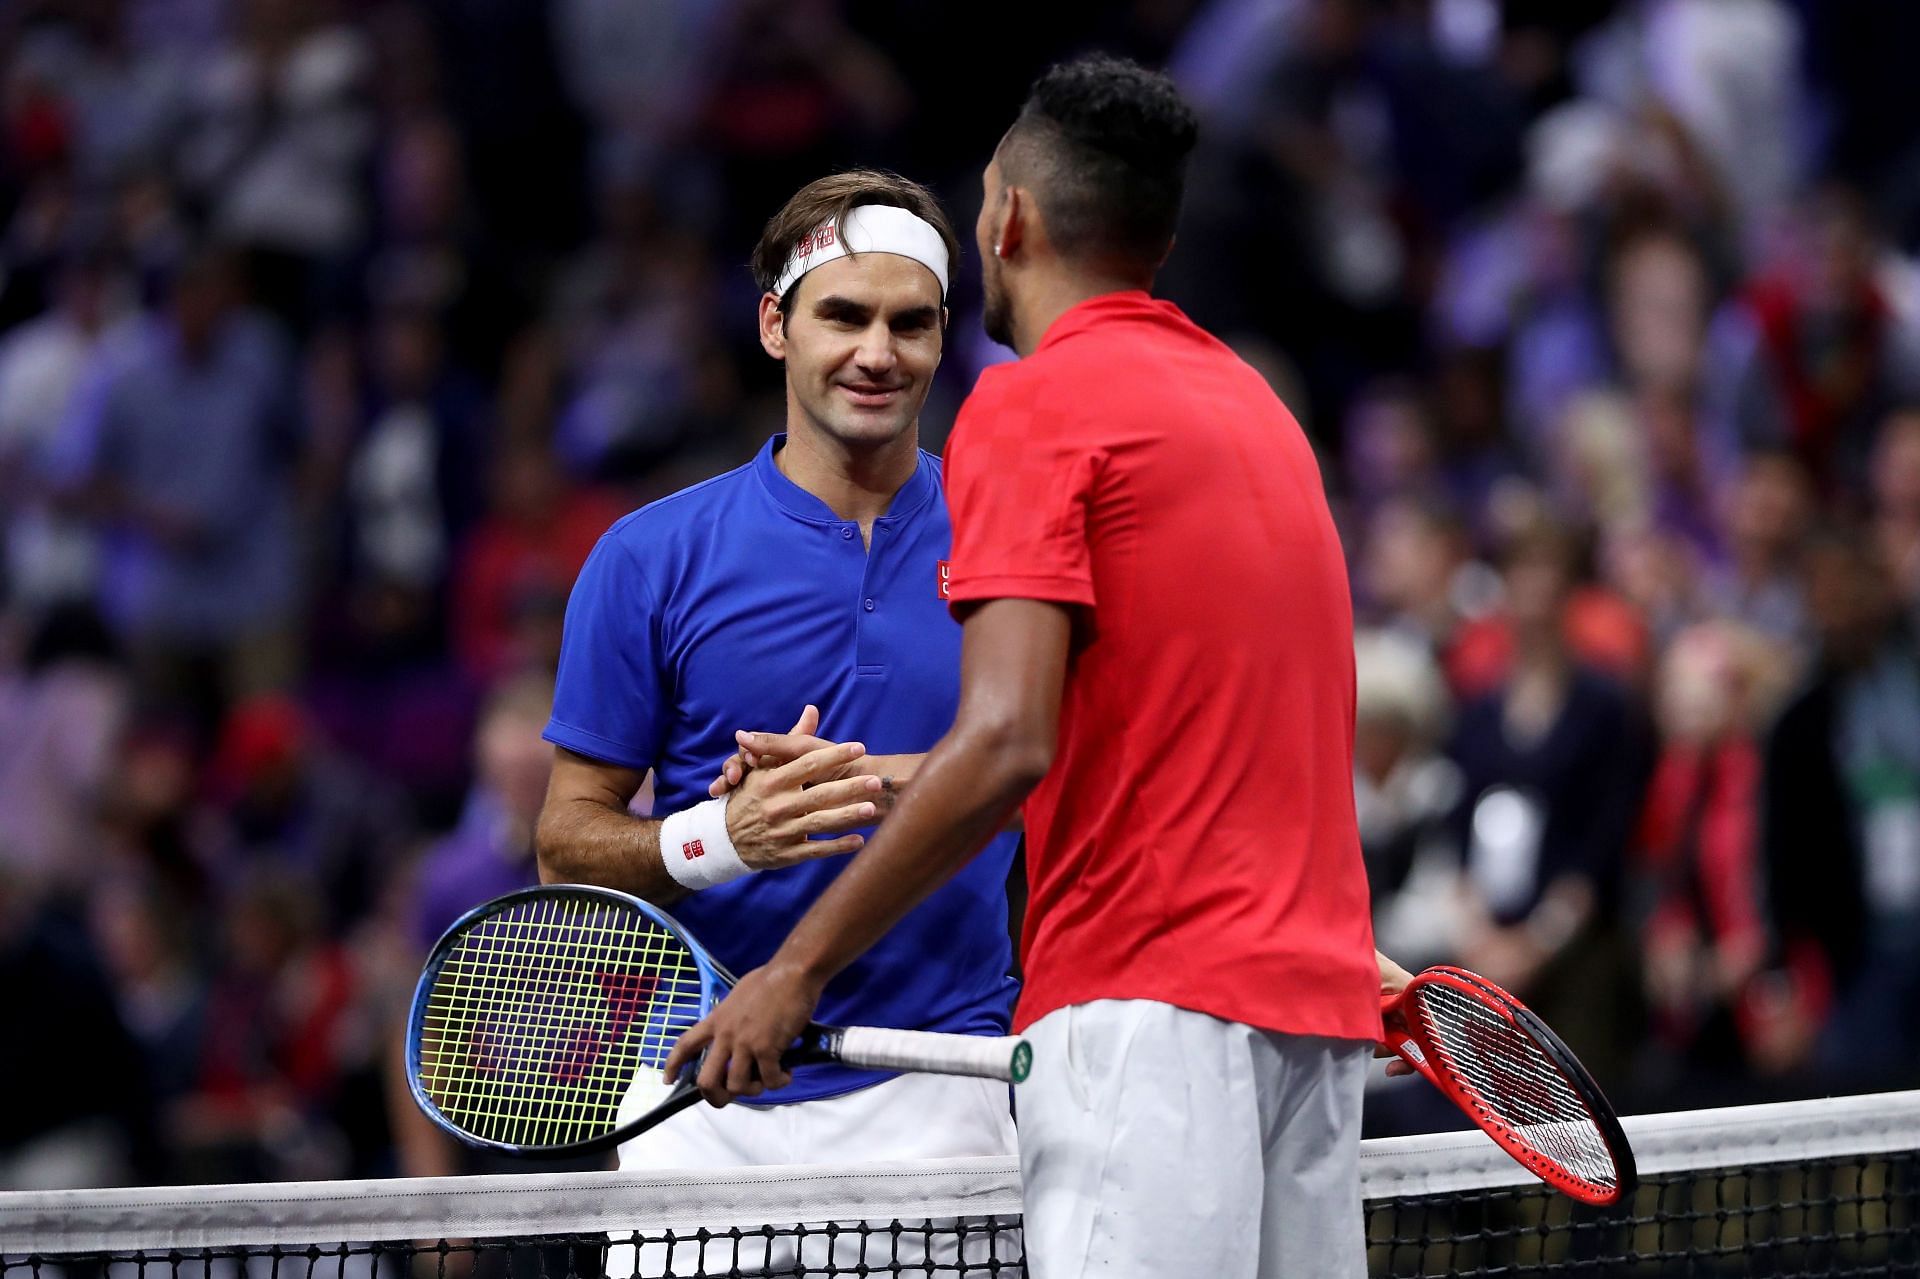 The Swiss maestro and Nick Kyrgios shake hands after their 2018 Laver Cup match